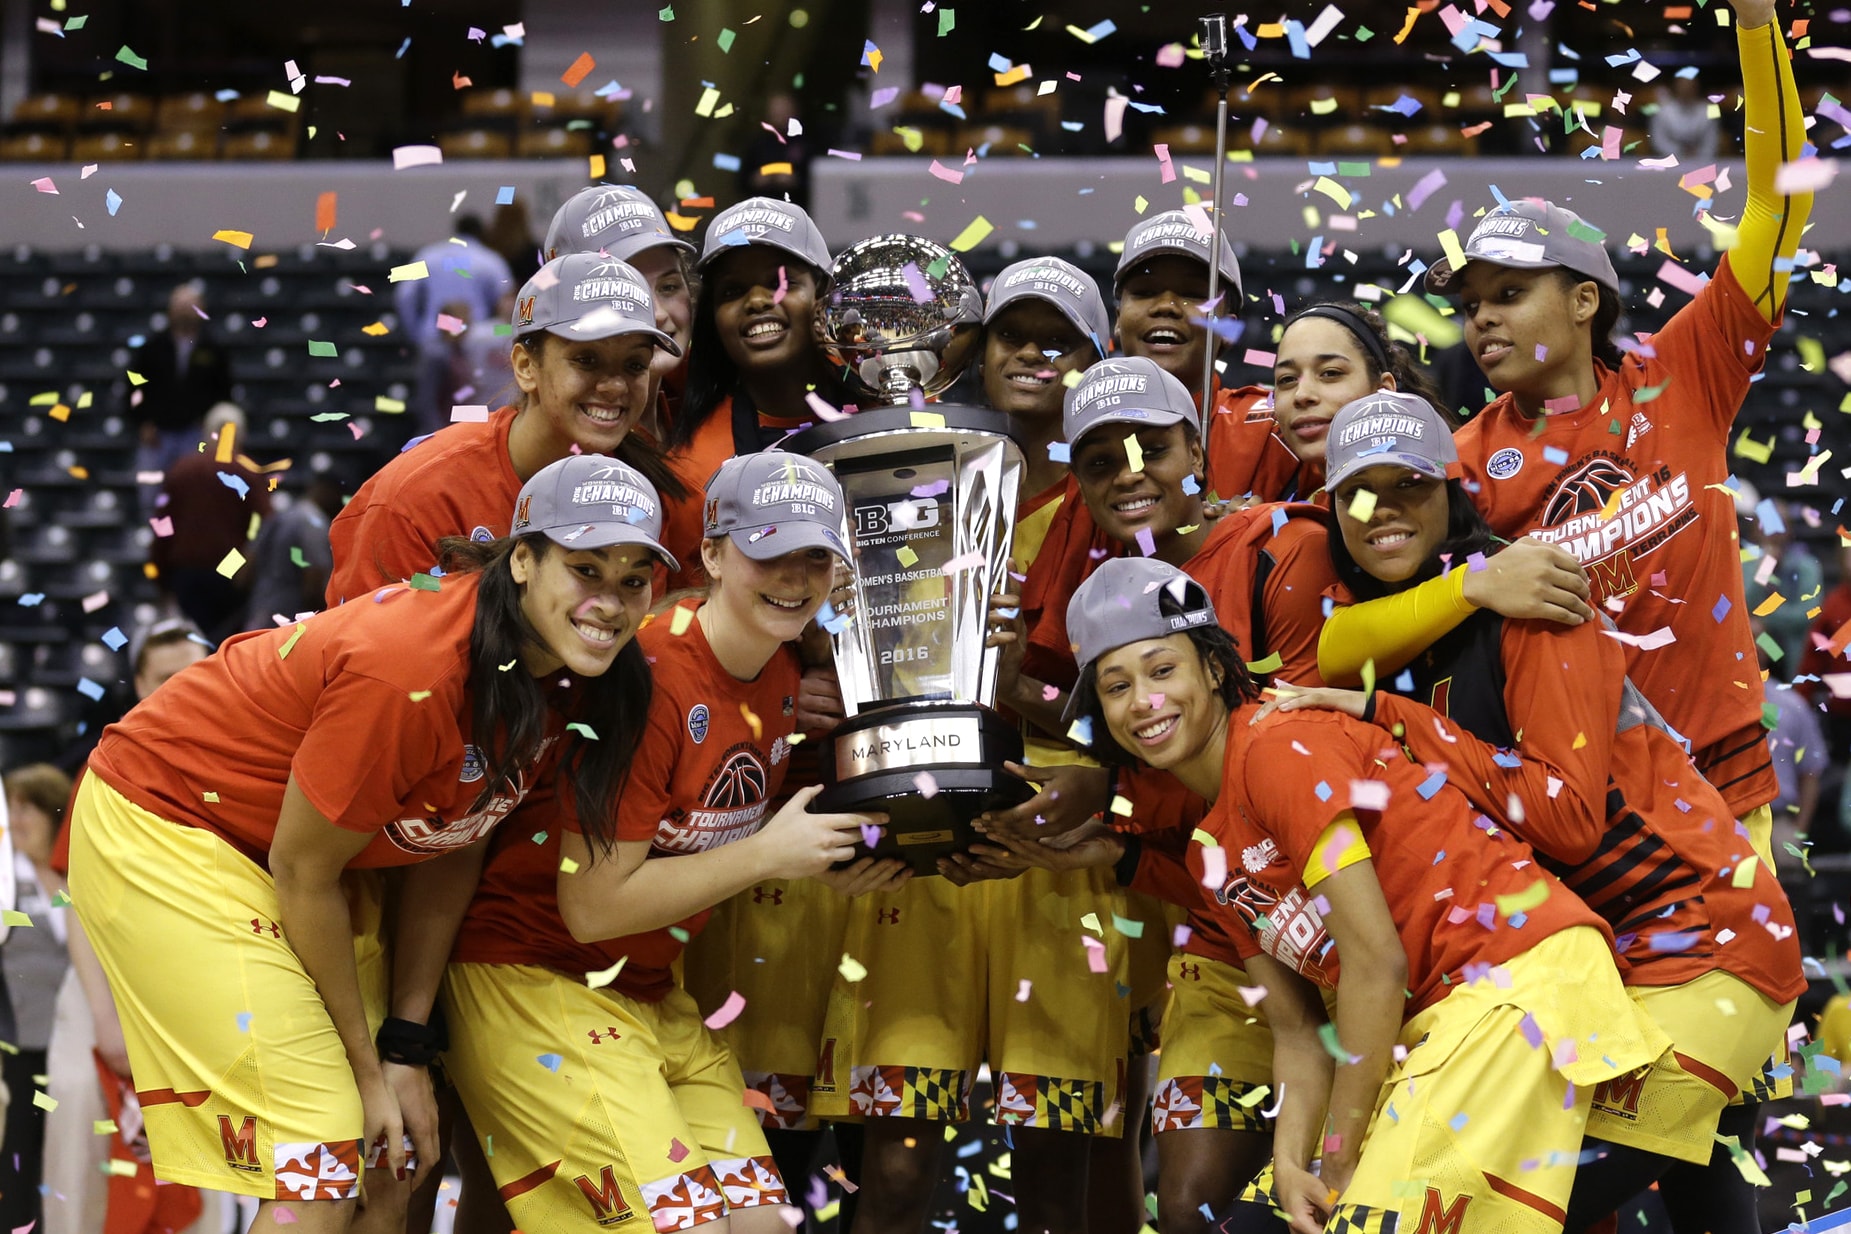 Maryland Womens Basketball Big Ten Champions 2016 Win 129 Points Bluefield State 100 points defeat